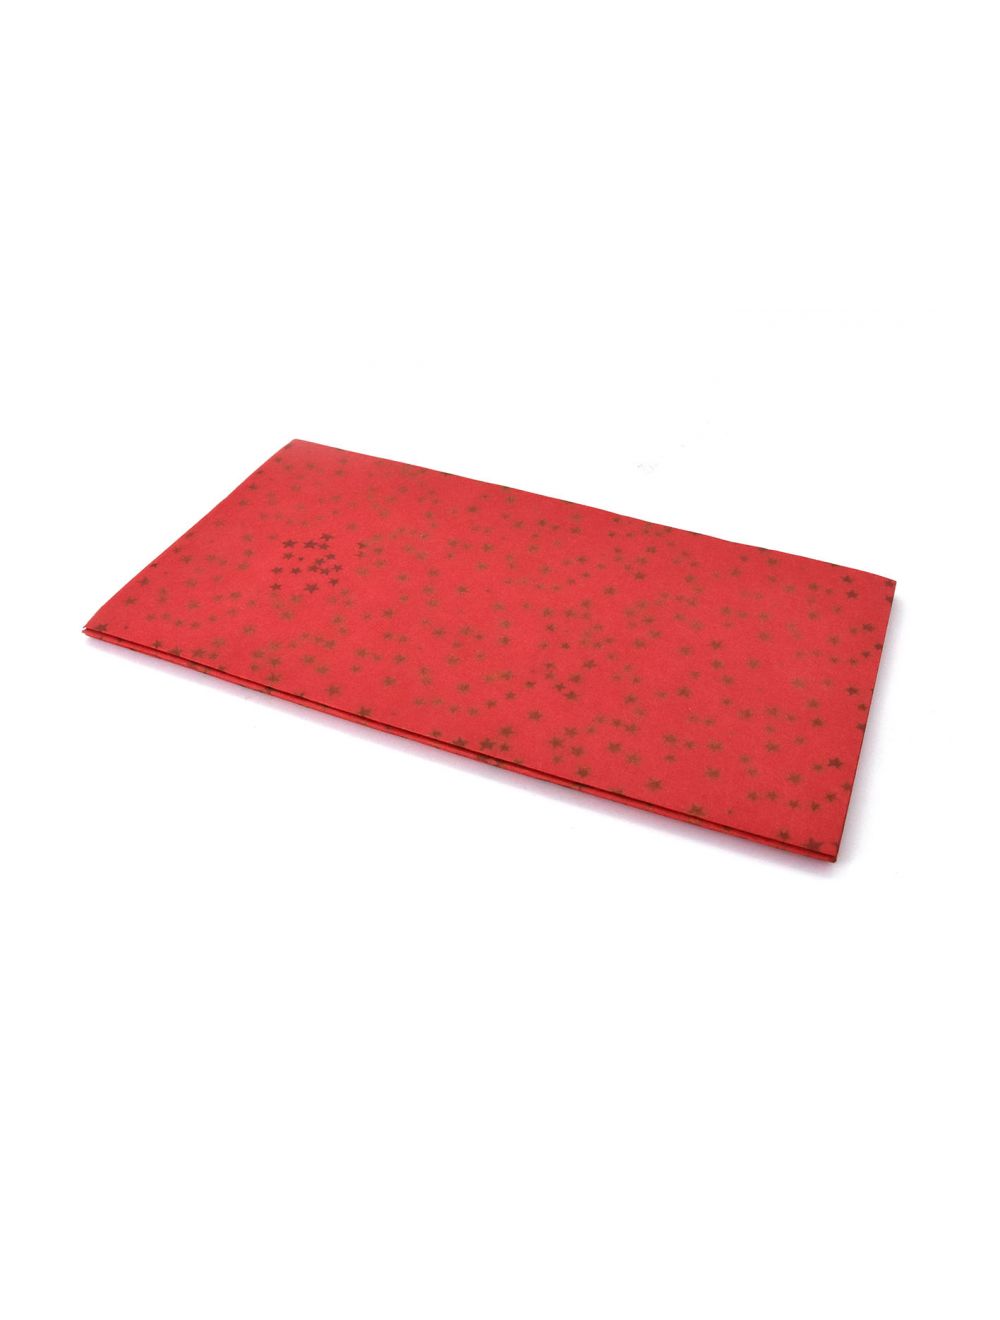 Red Color Table Cover Assorted With Scattered Stars Design